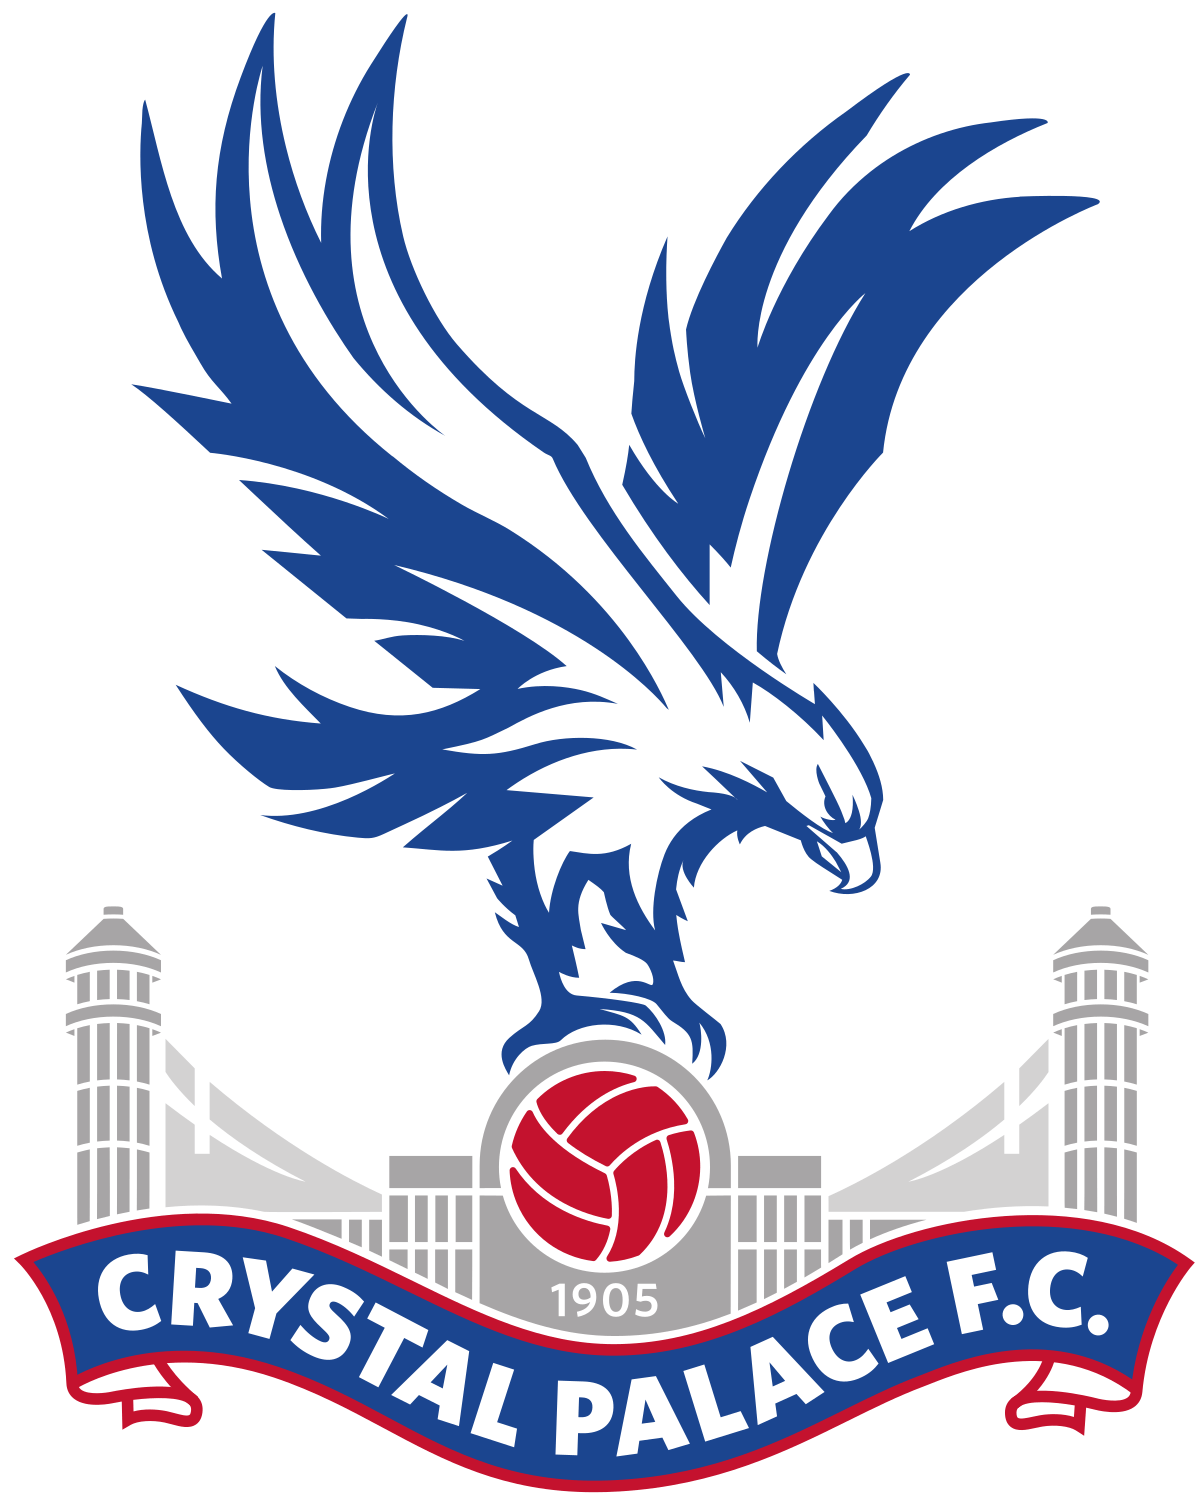 Newspaper with Red Eagle Logo - Crystal Palace F.C.